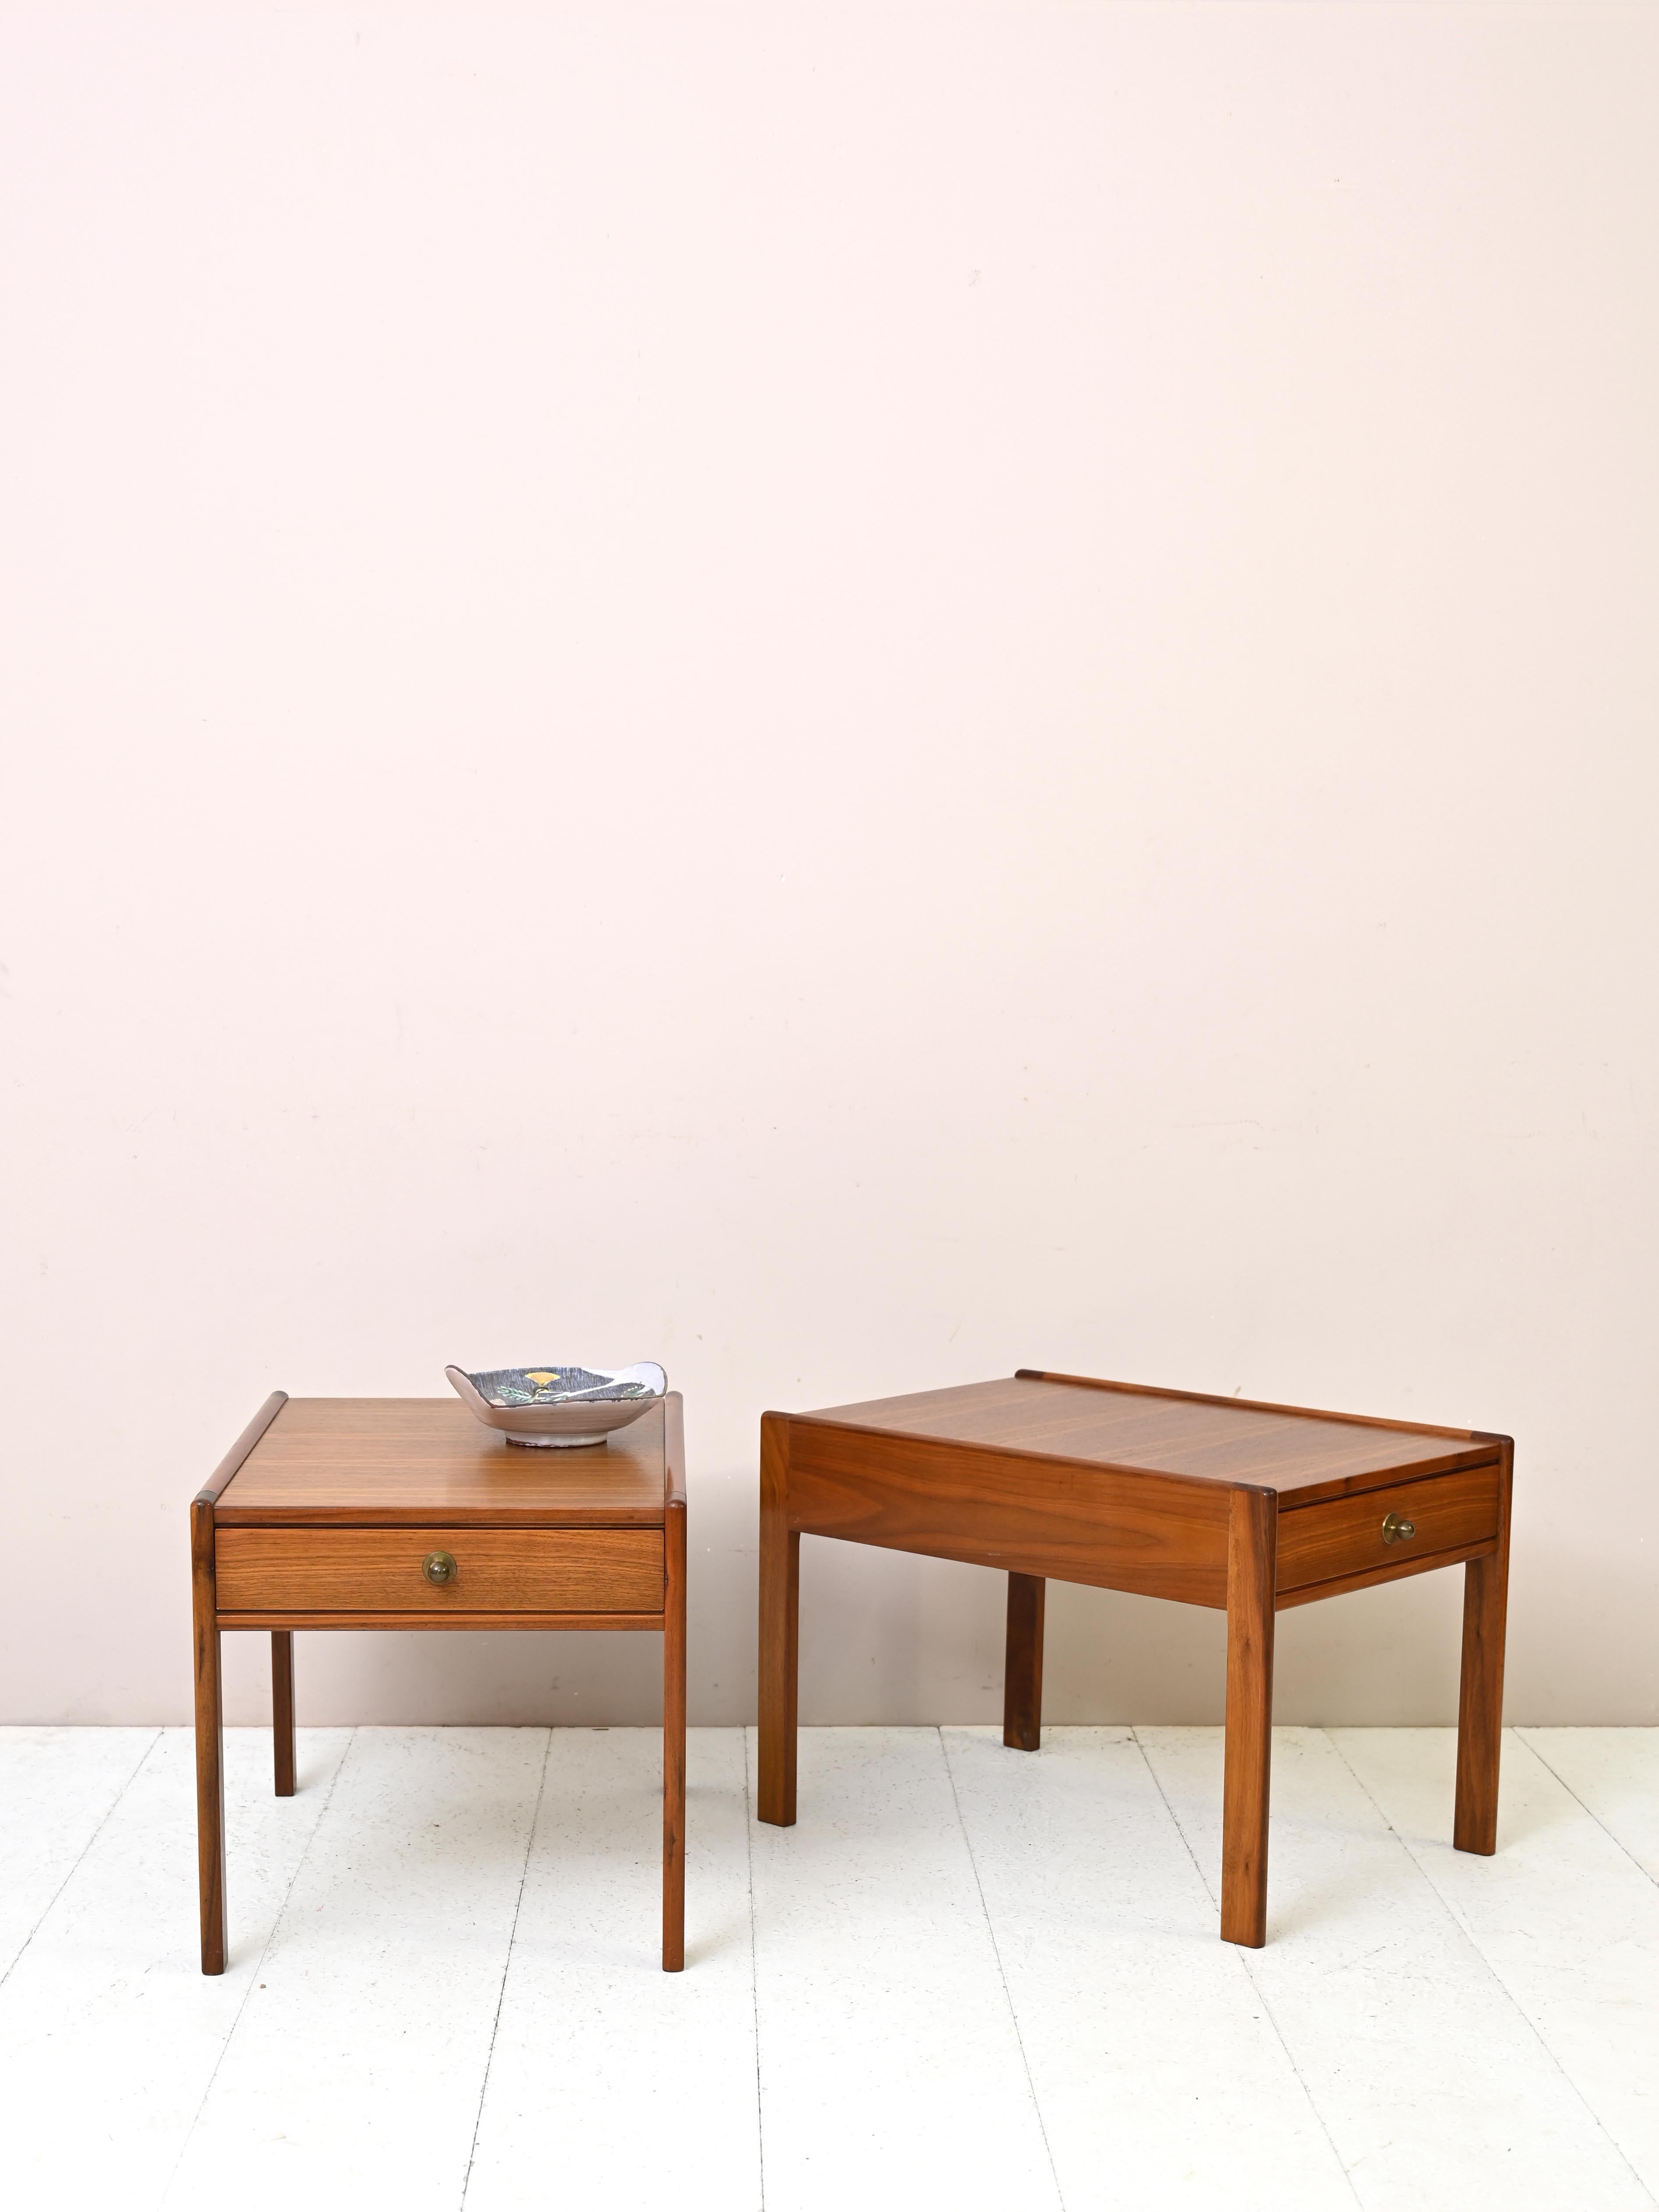 Vintage teak living room side tables.
An elegant set of two vintage teak side tables with classic and sophisticated lines. These side tables represent mastery in the art of Scandinavian design and are distinguished by their long, narrow shape,